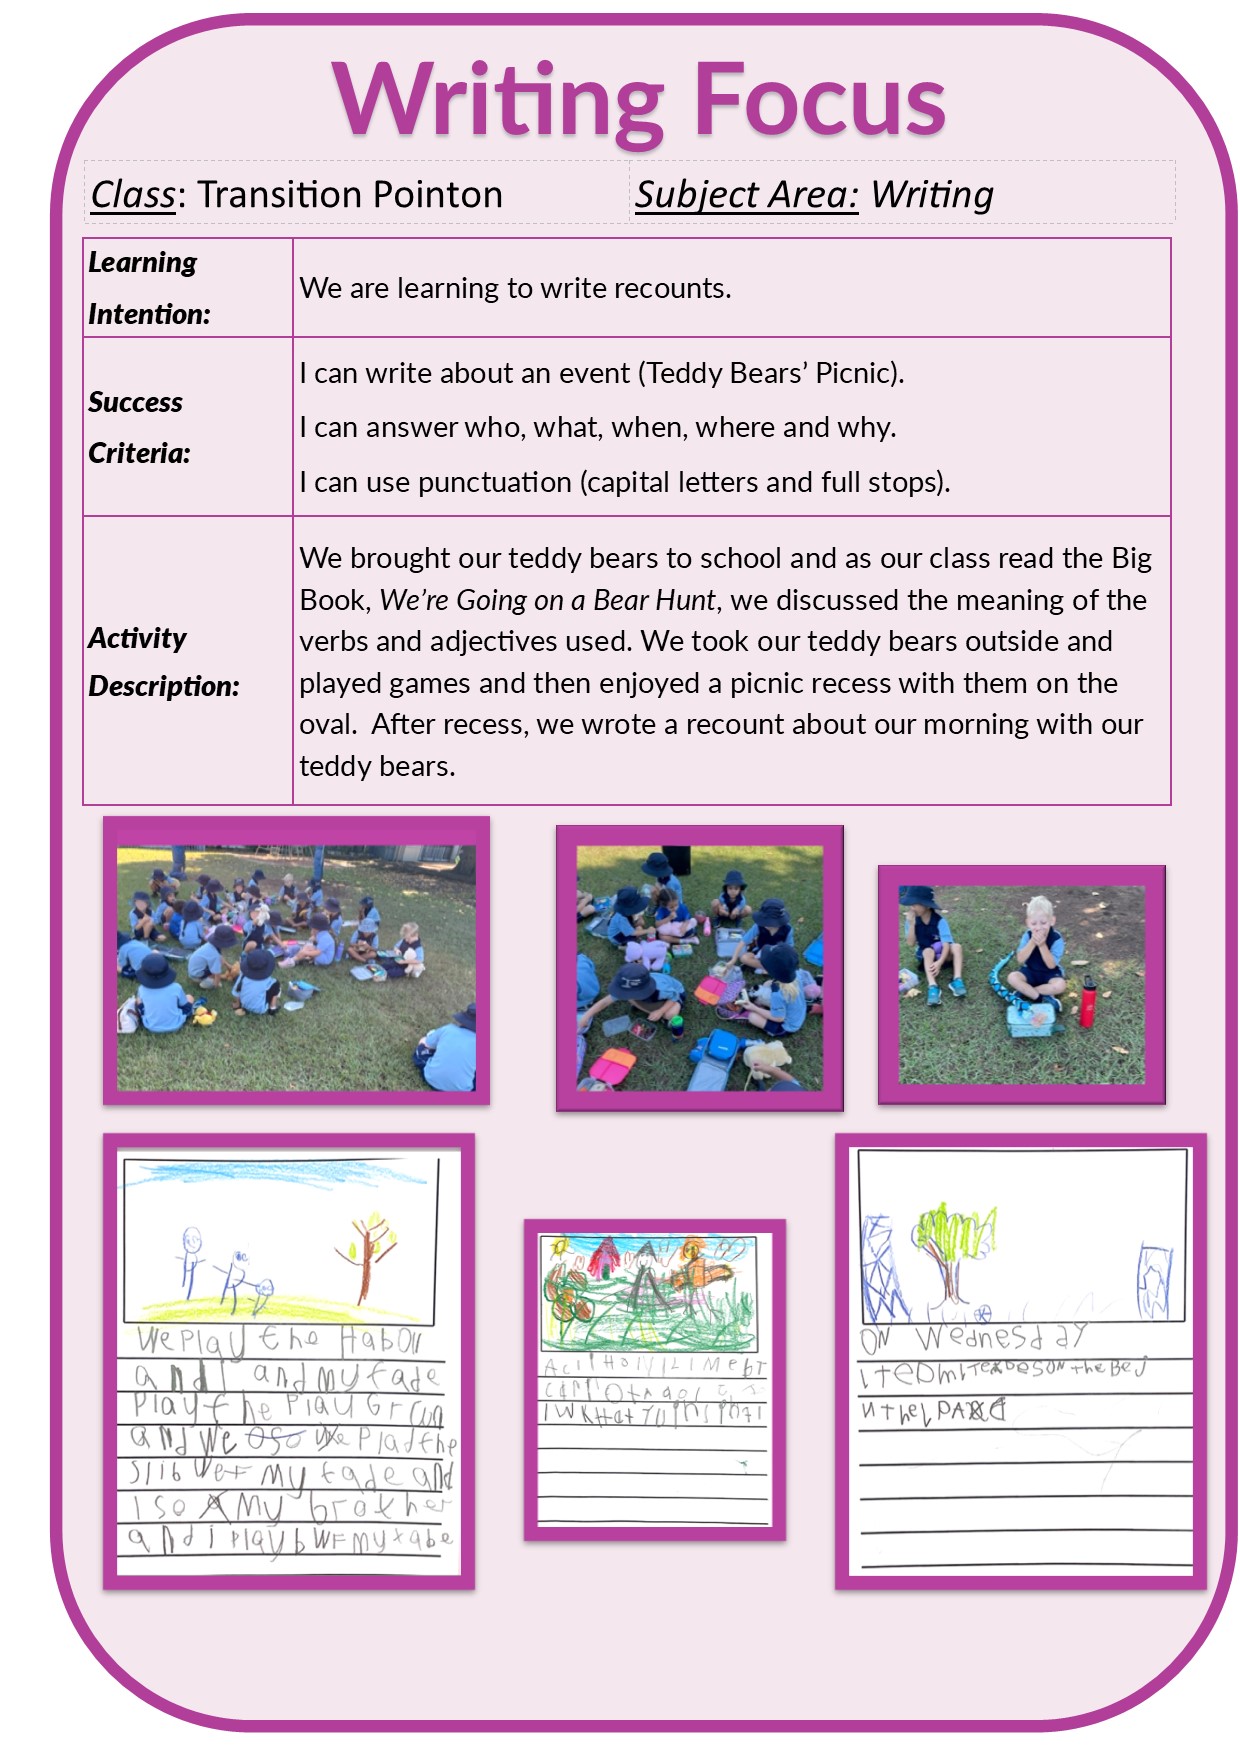 Visible Learning/Tr Pointon - Writing Term 2 Week 5.jpg